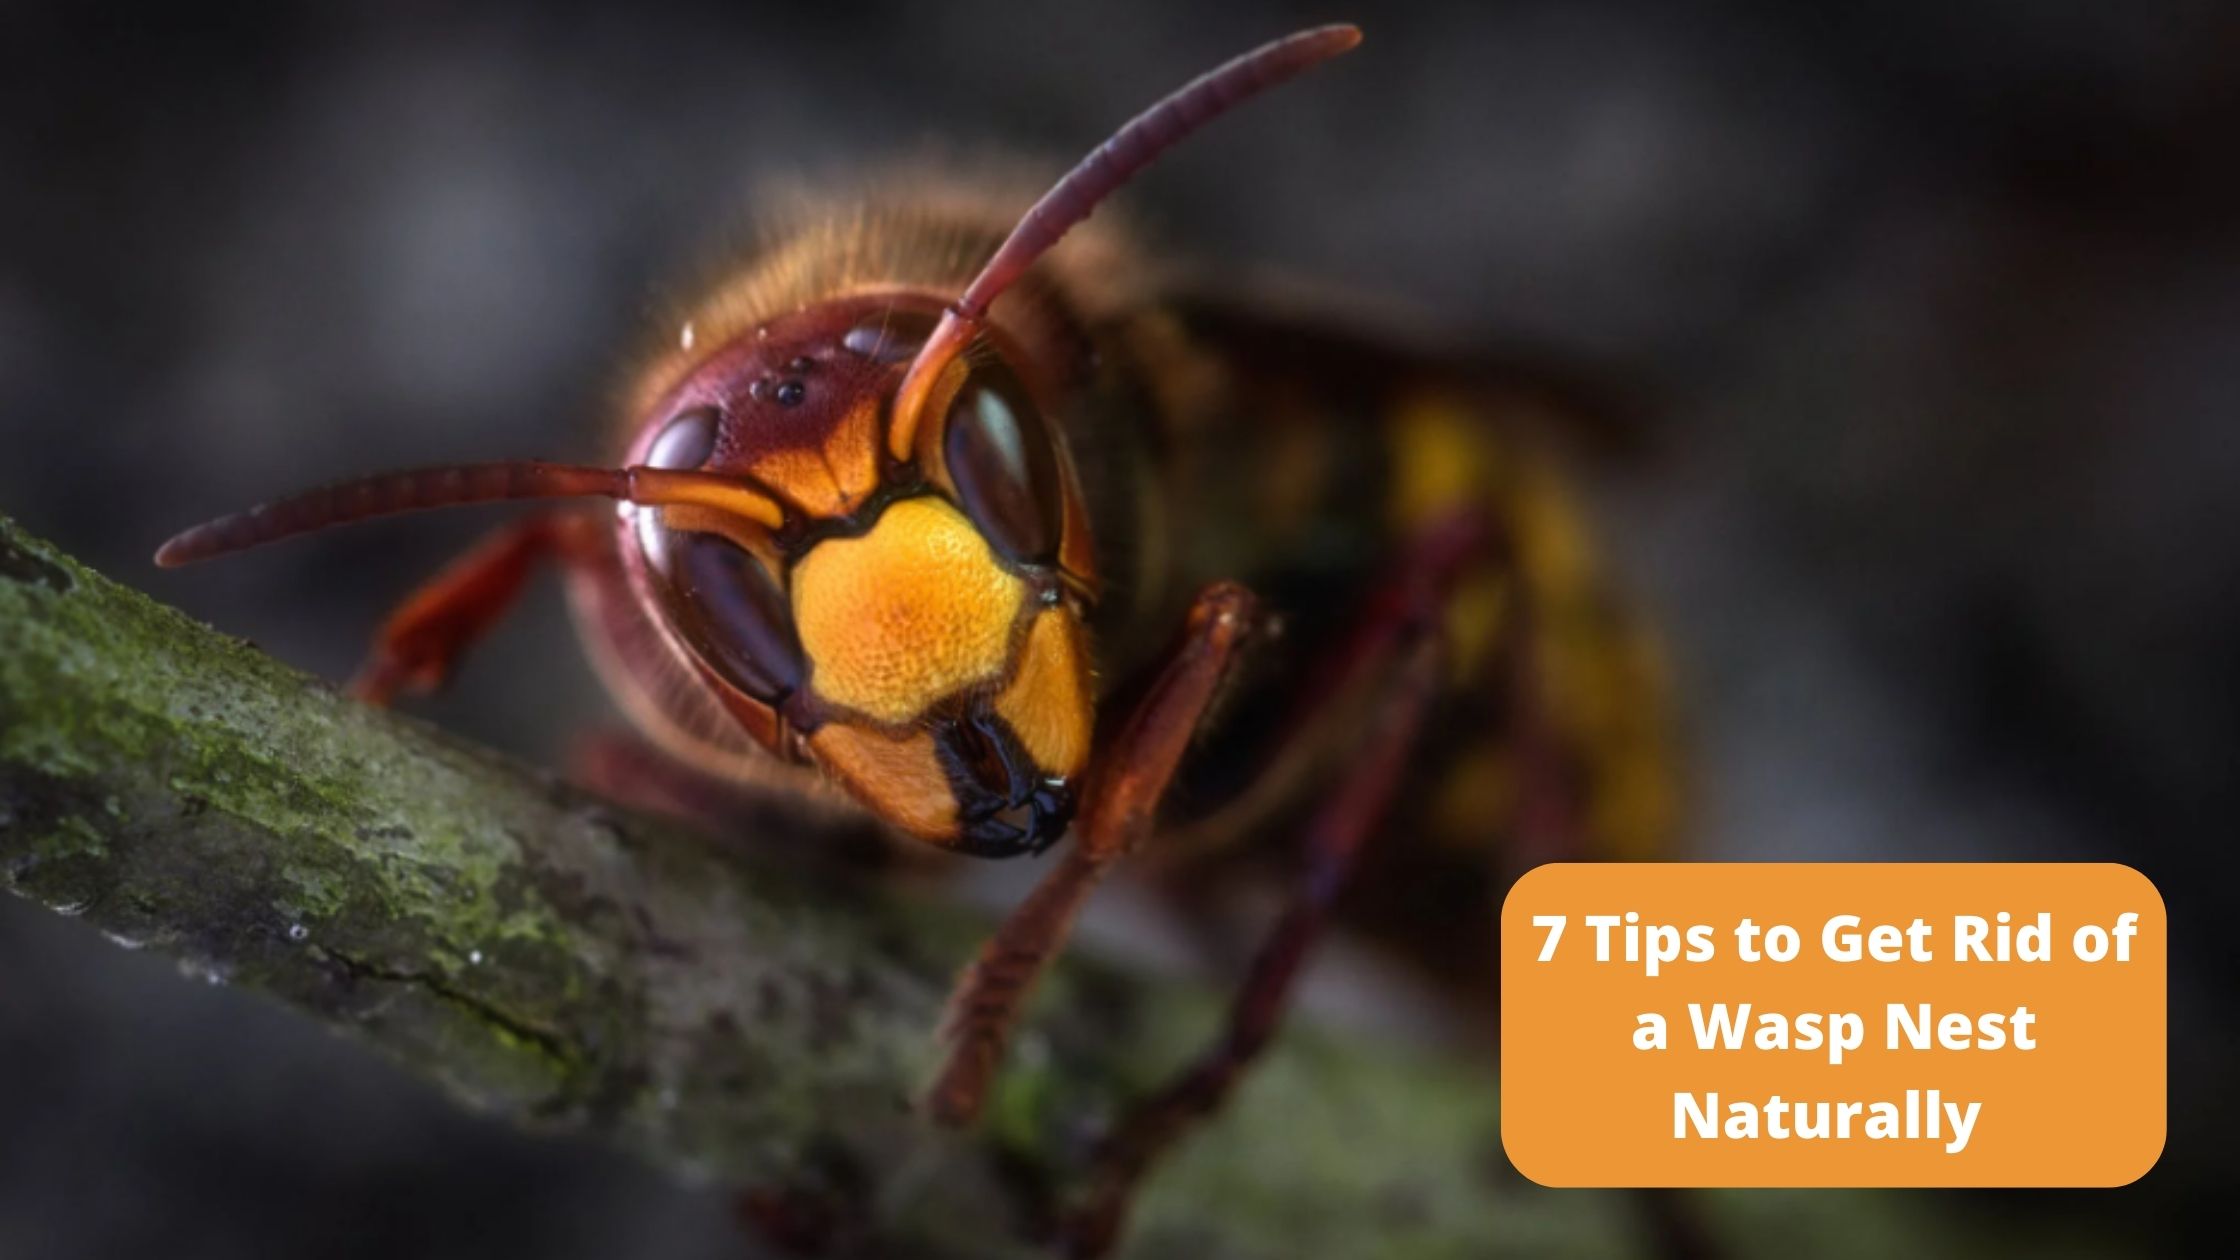 7 Tips to Get Rid of a Wasp Nest Naturally